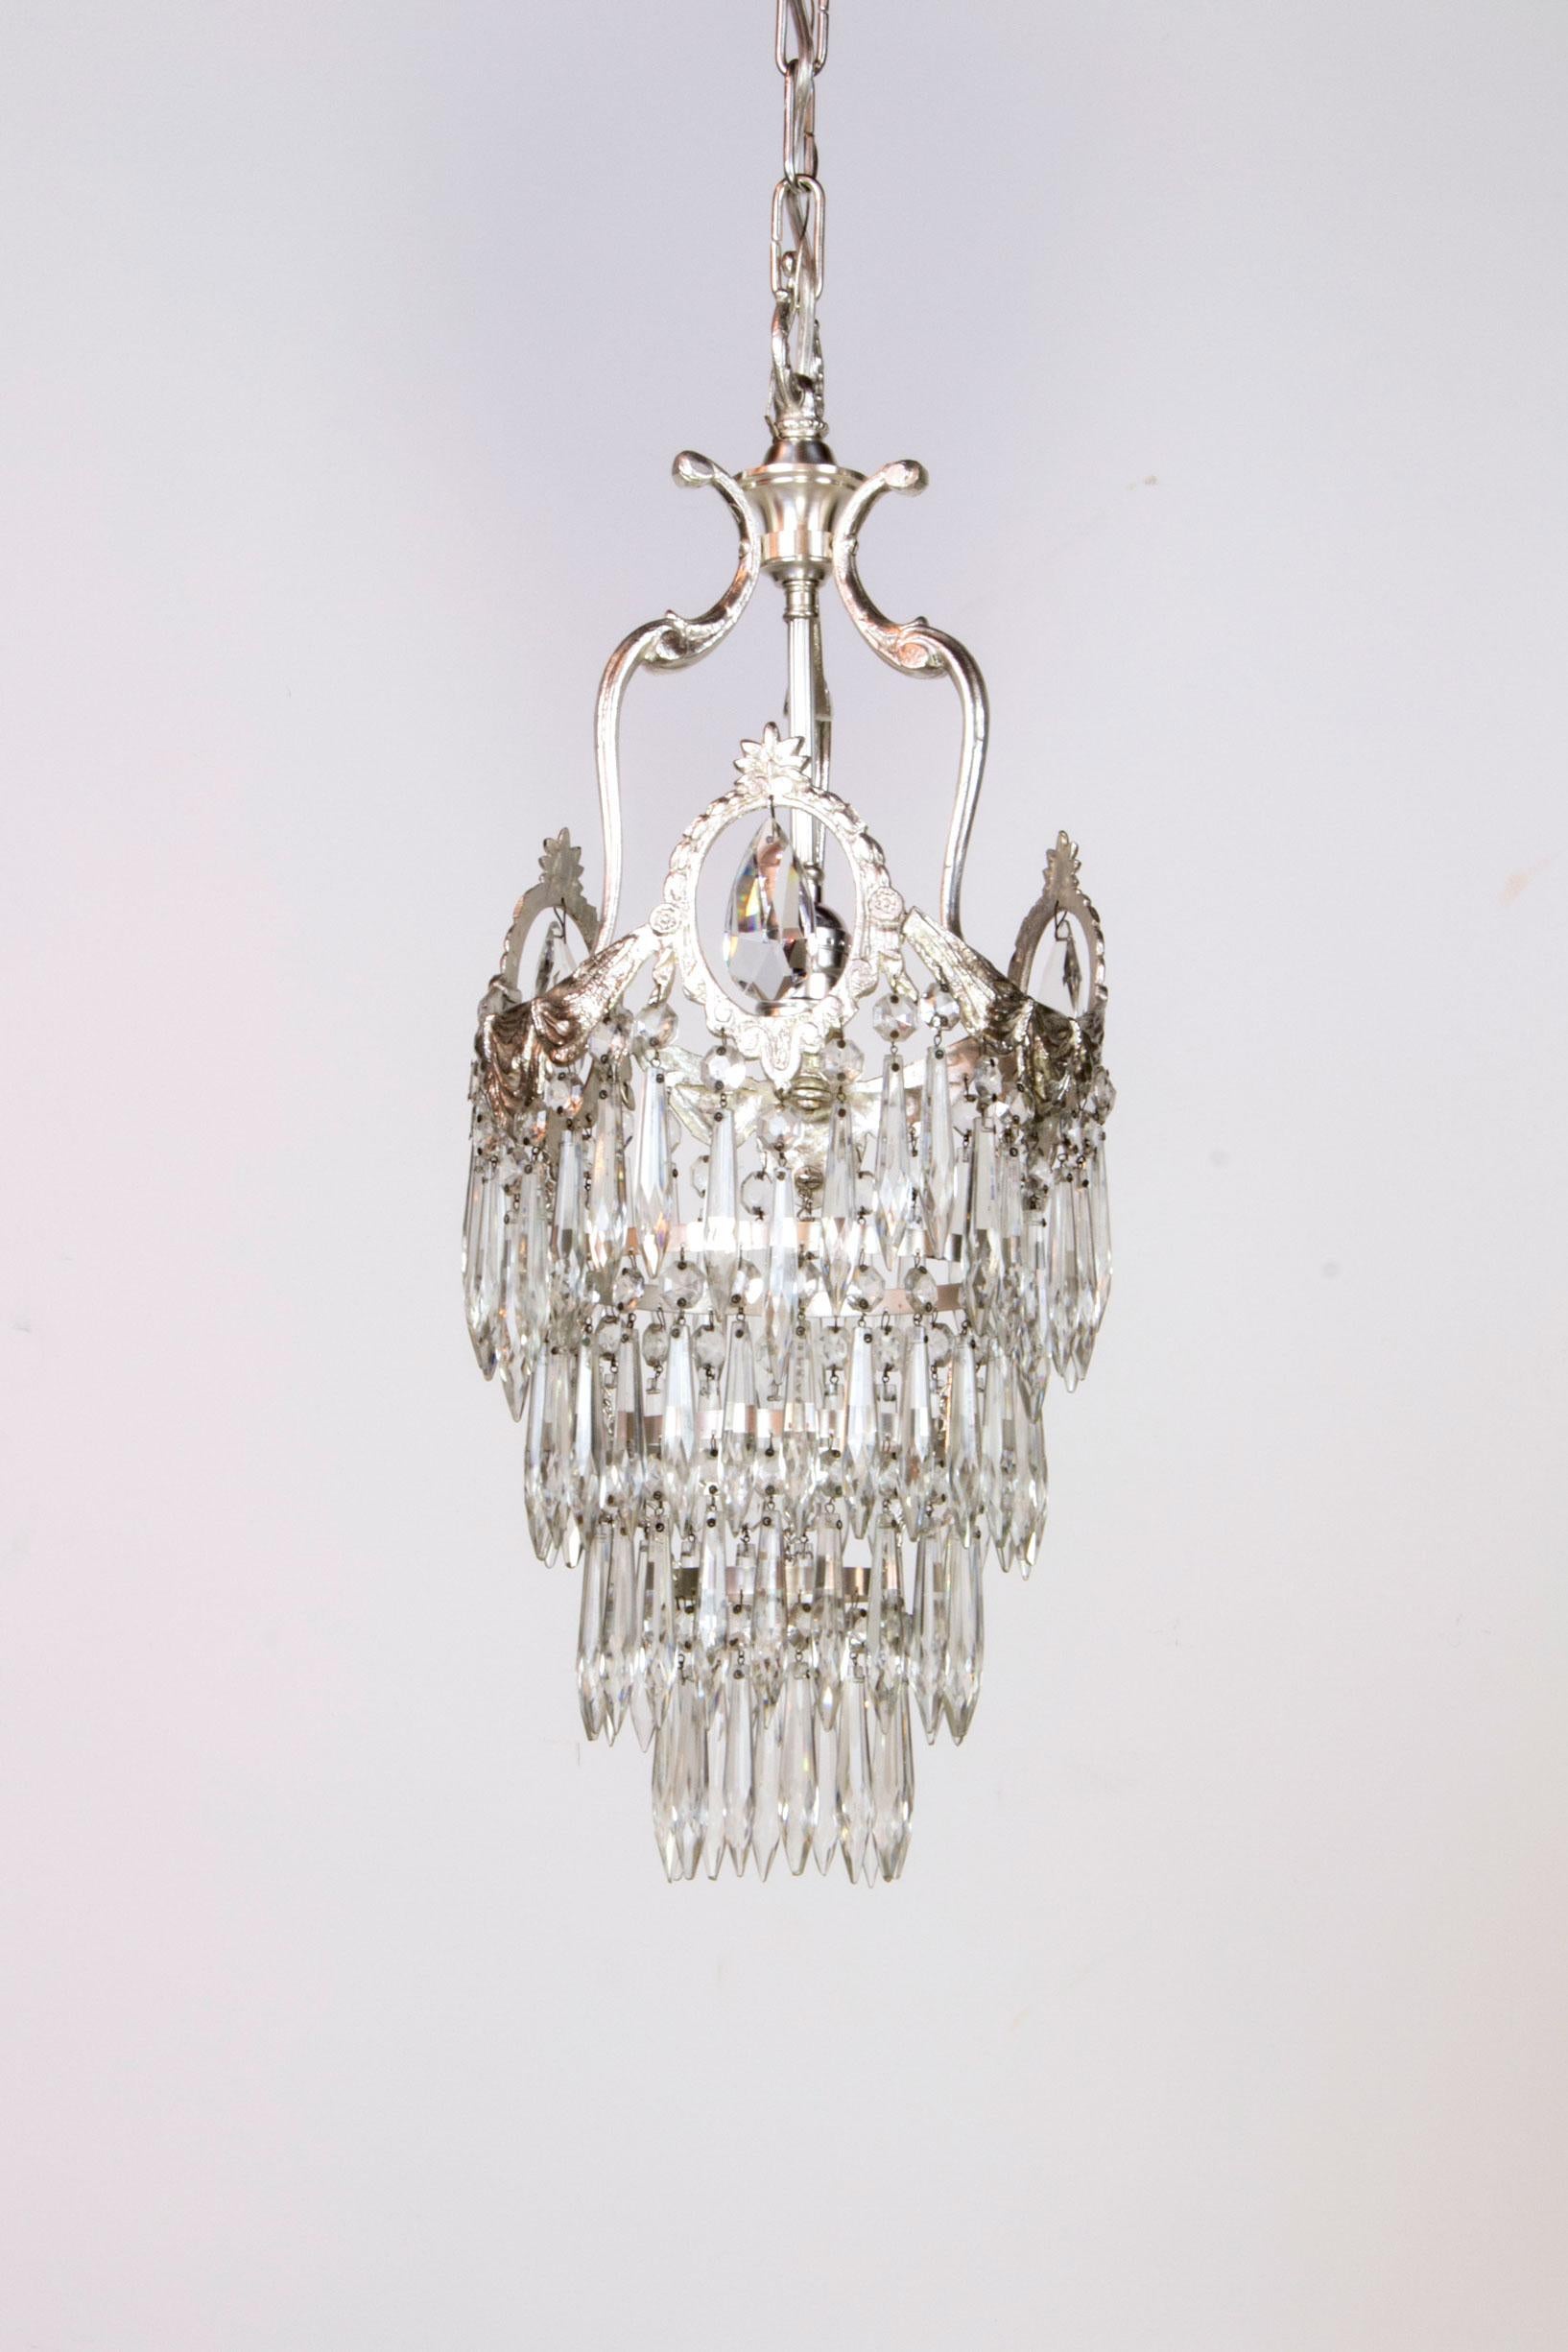 A pair of silver plate fixtures with crystal. sculptural crown with keyhole crystal and tiers of crystals cascading below. Add a touch of glamor to a kitchen, hallway, or even as hanging bedside pendants. Completely restored and rewired, ready to